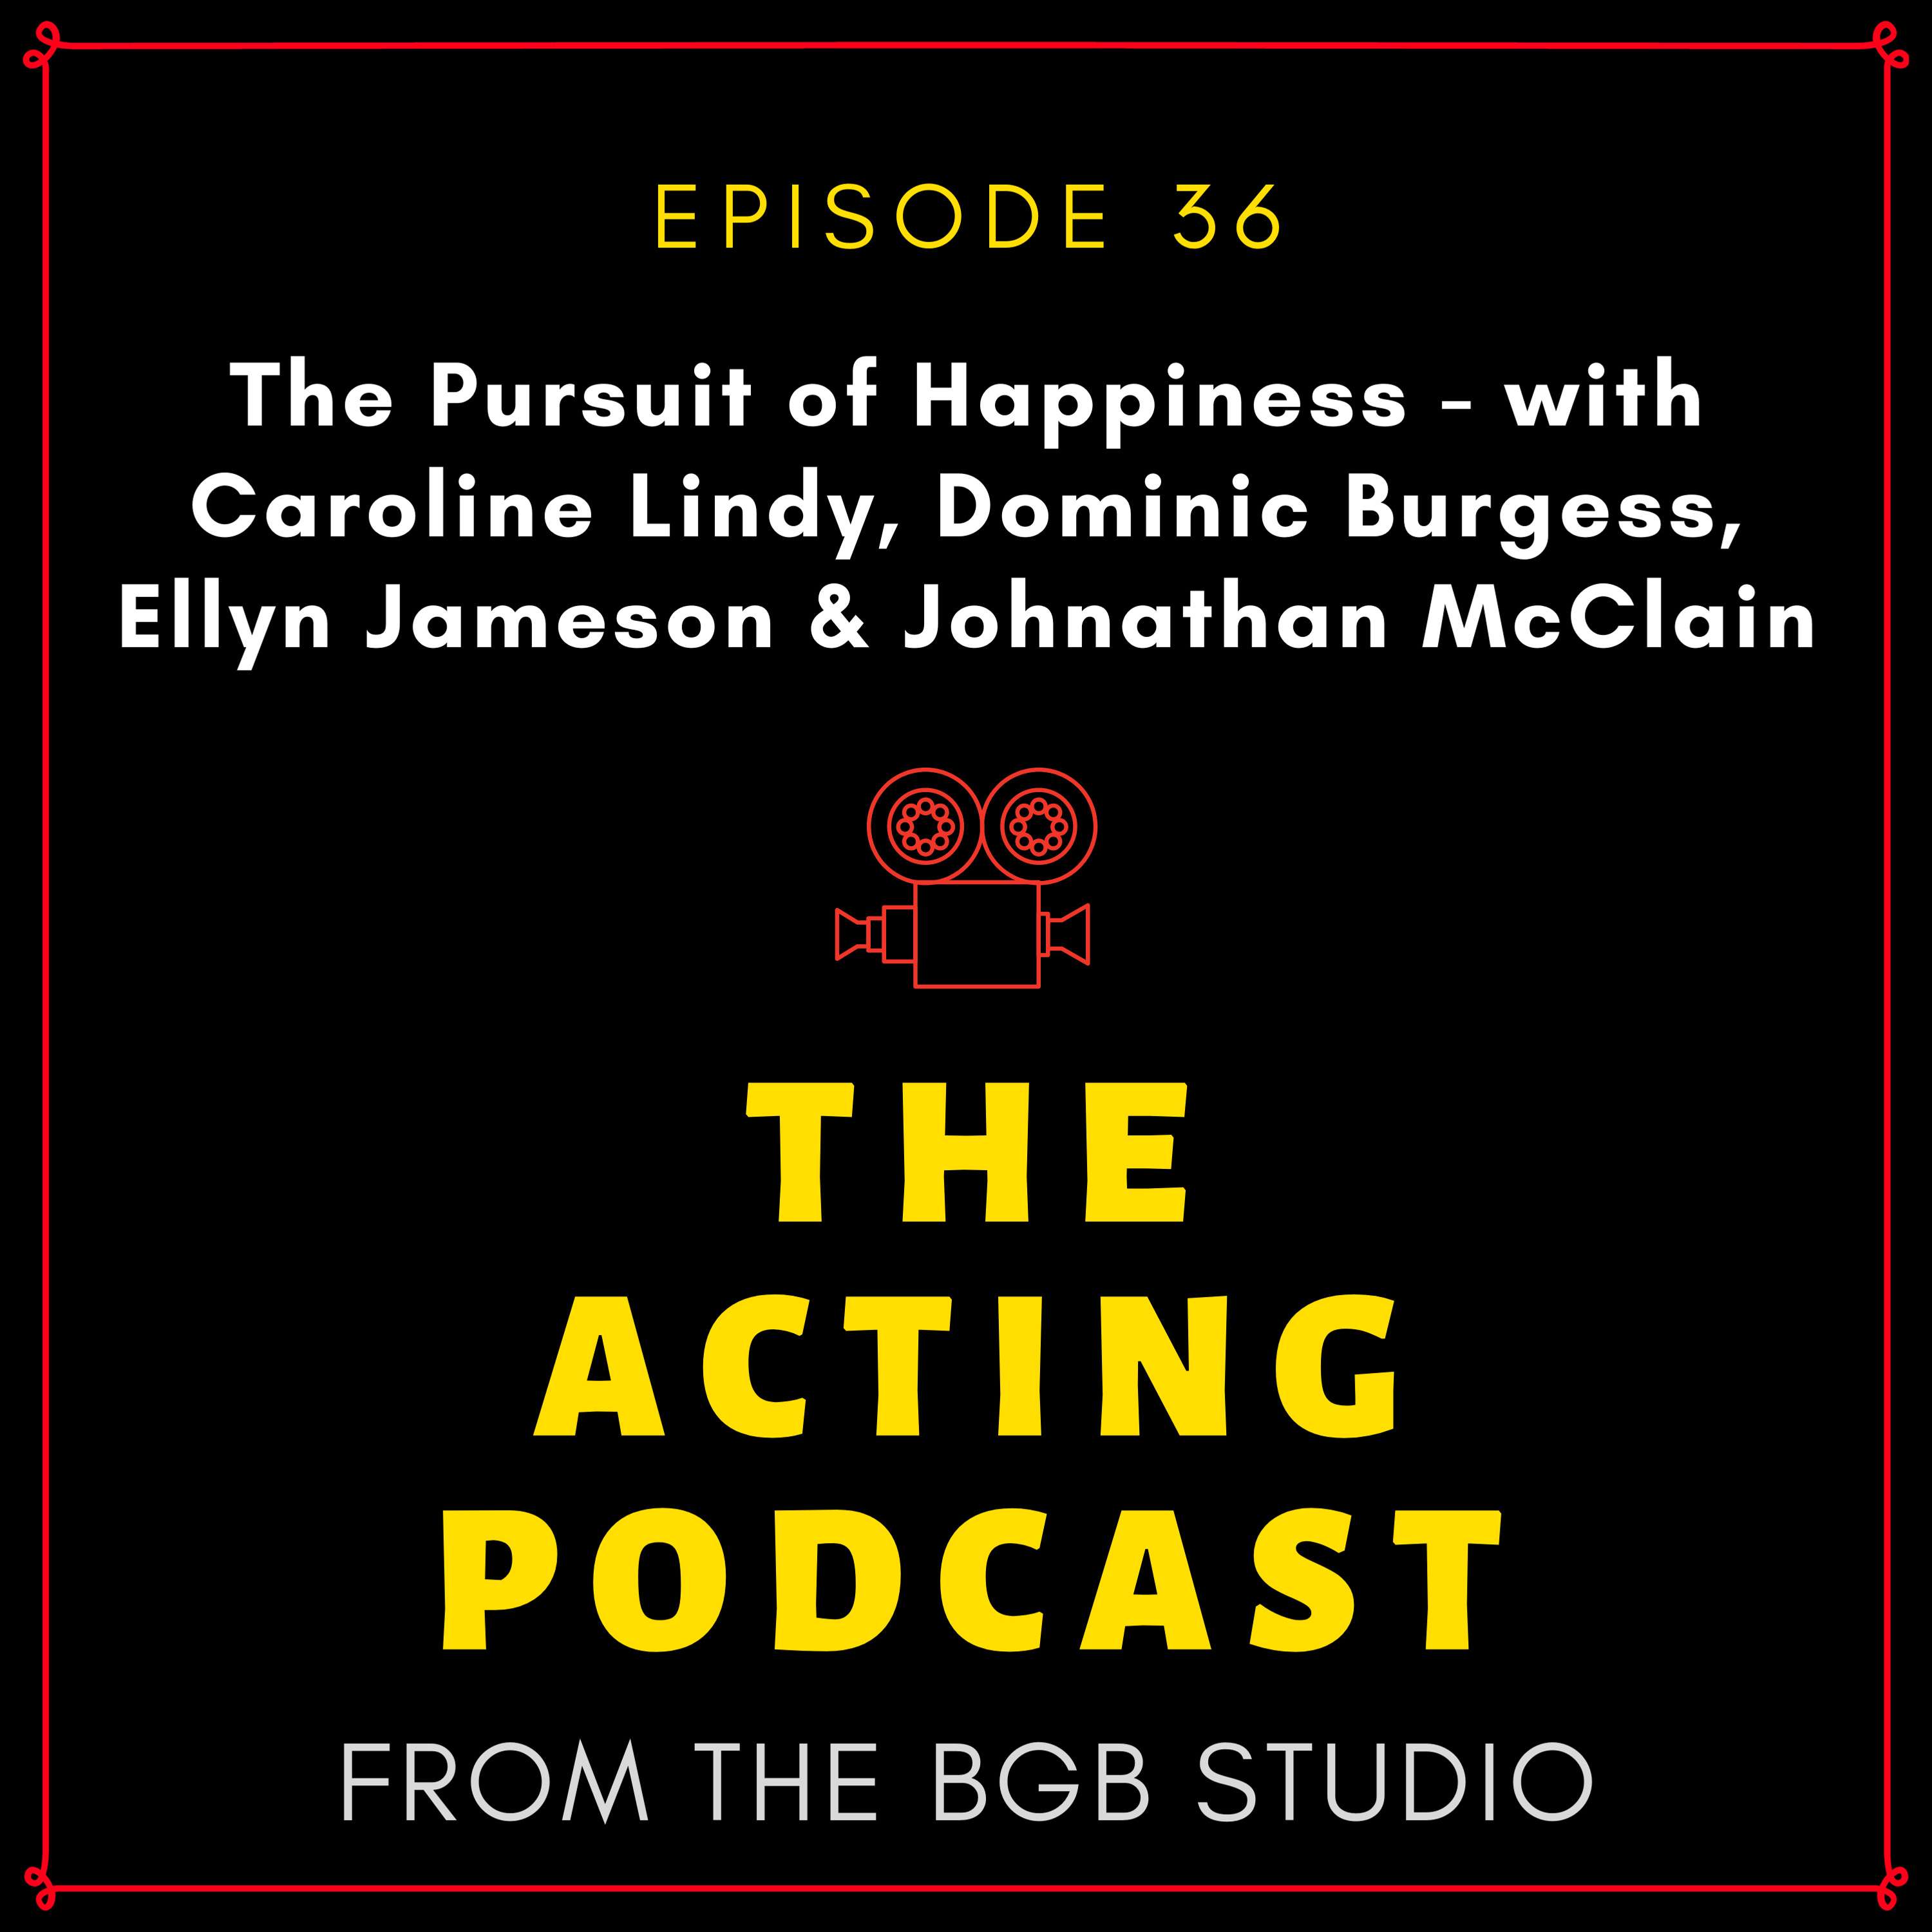 The Pursuit of Happiness - with Caroline Lindy, Dominic Burgess, Ellyn Jameson & Johnathan McClain